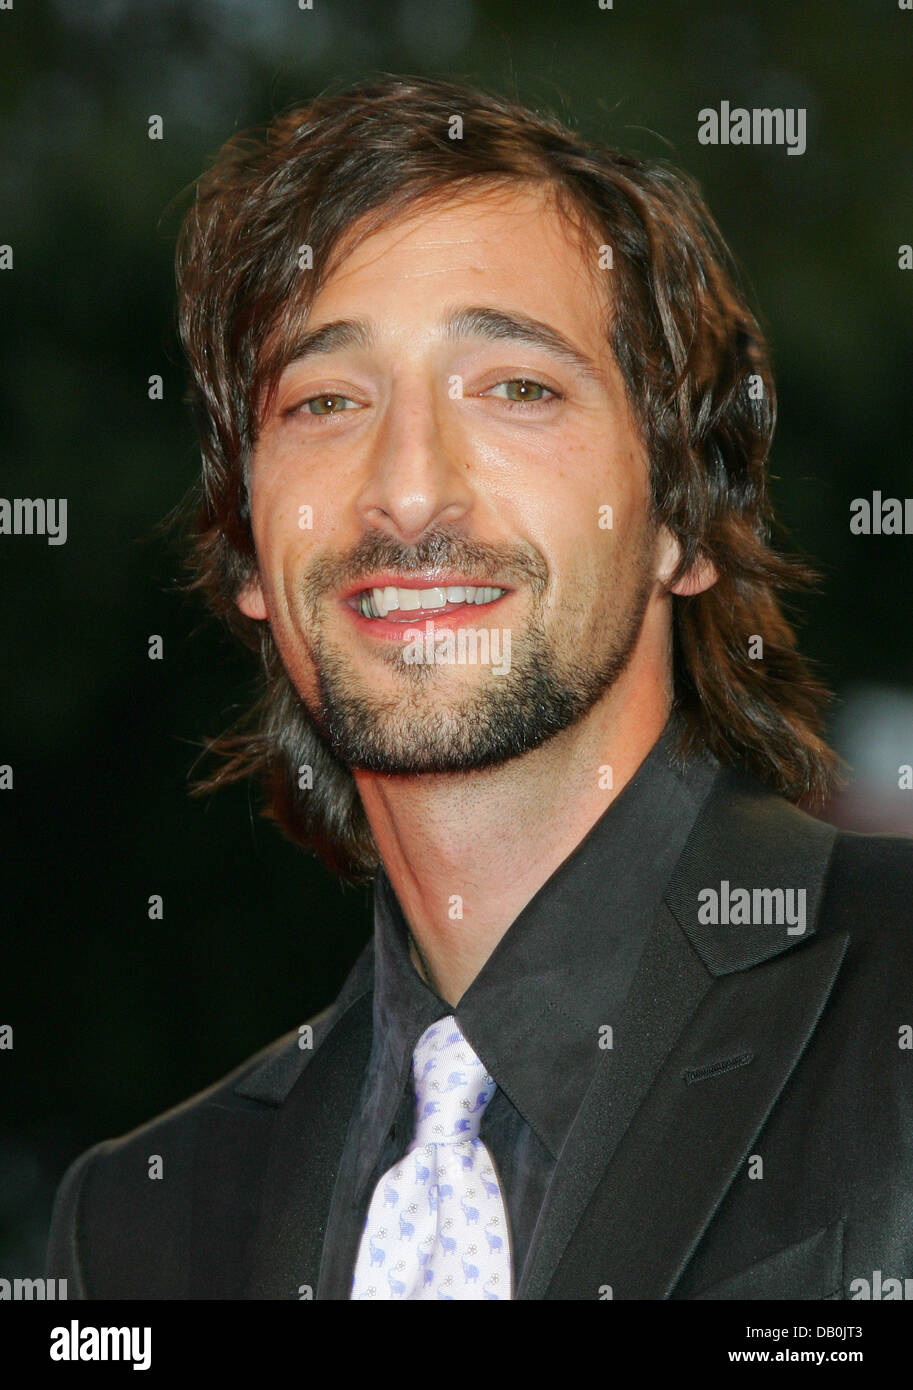 US actor Adrien Brody arrives for the premiere of 'The Darjeeling Limited' at the 64th Venice International Film Festival in Venice, Italy, 03 September 2007. Photo: Hubert Boesl Stock Photo